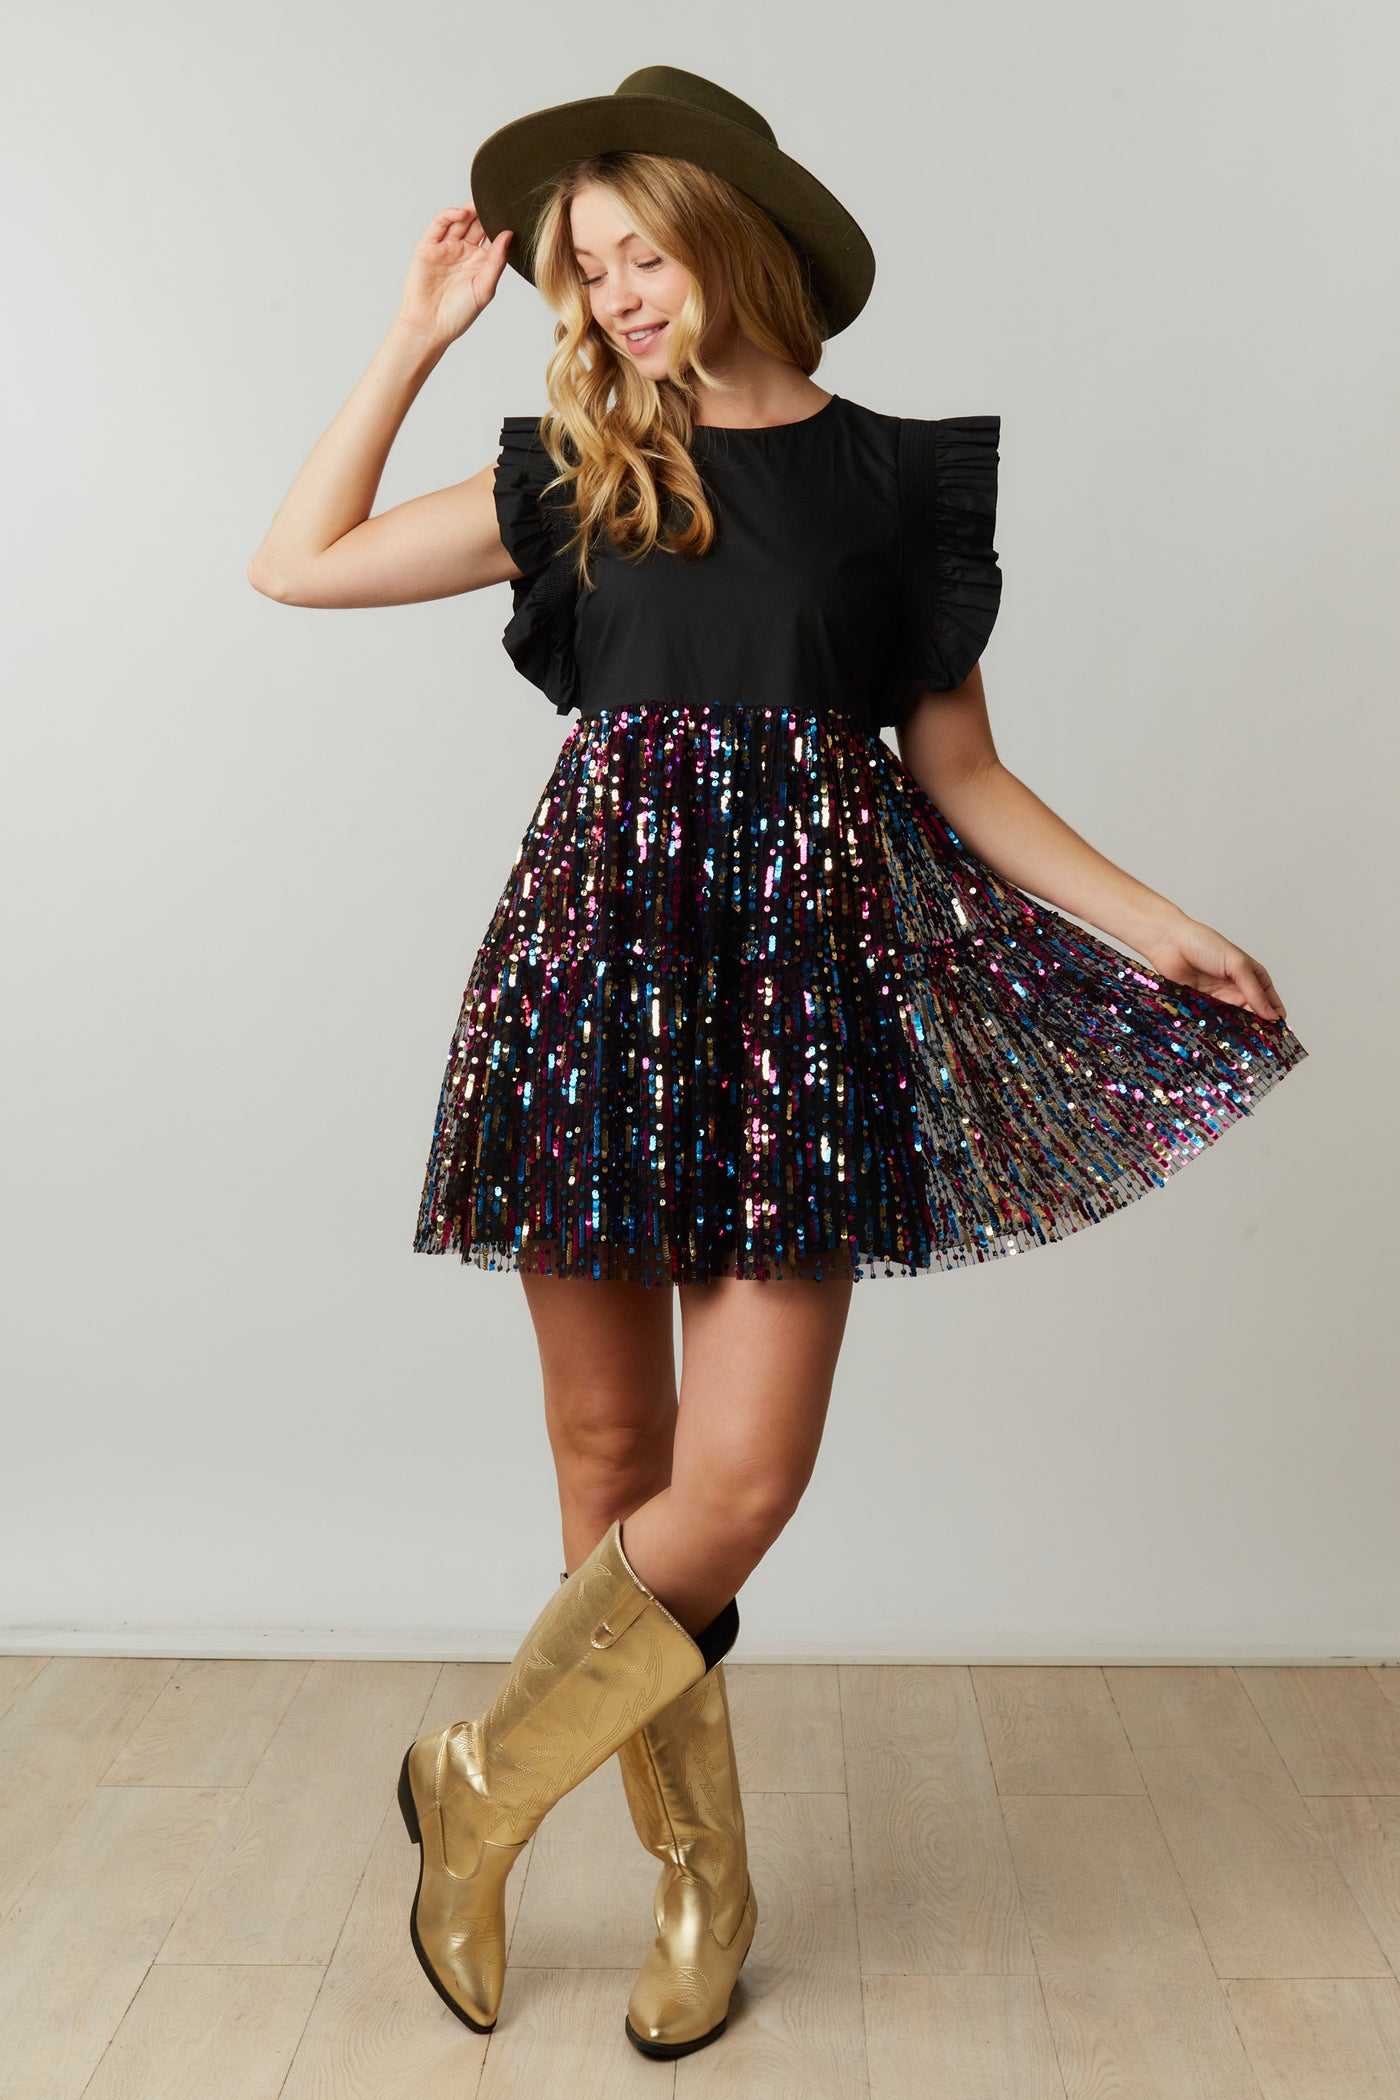 The Janet Dress in Black Rainbow Sequin